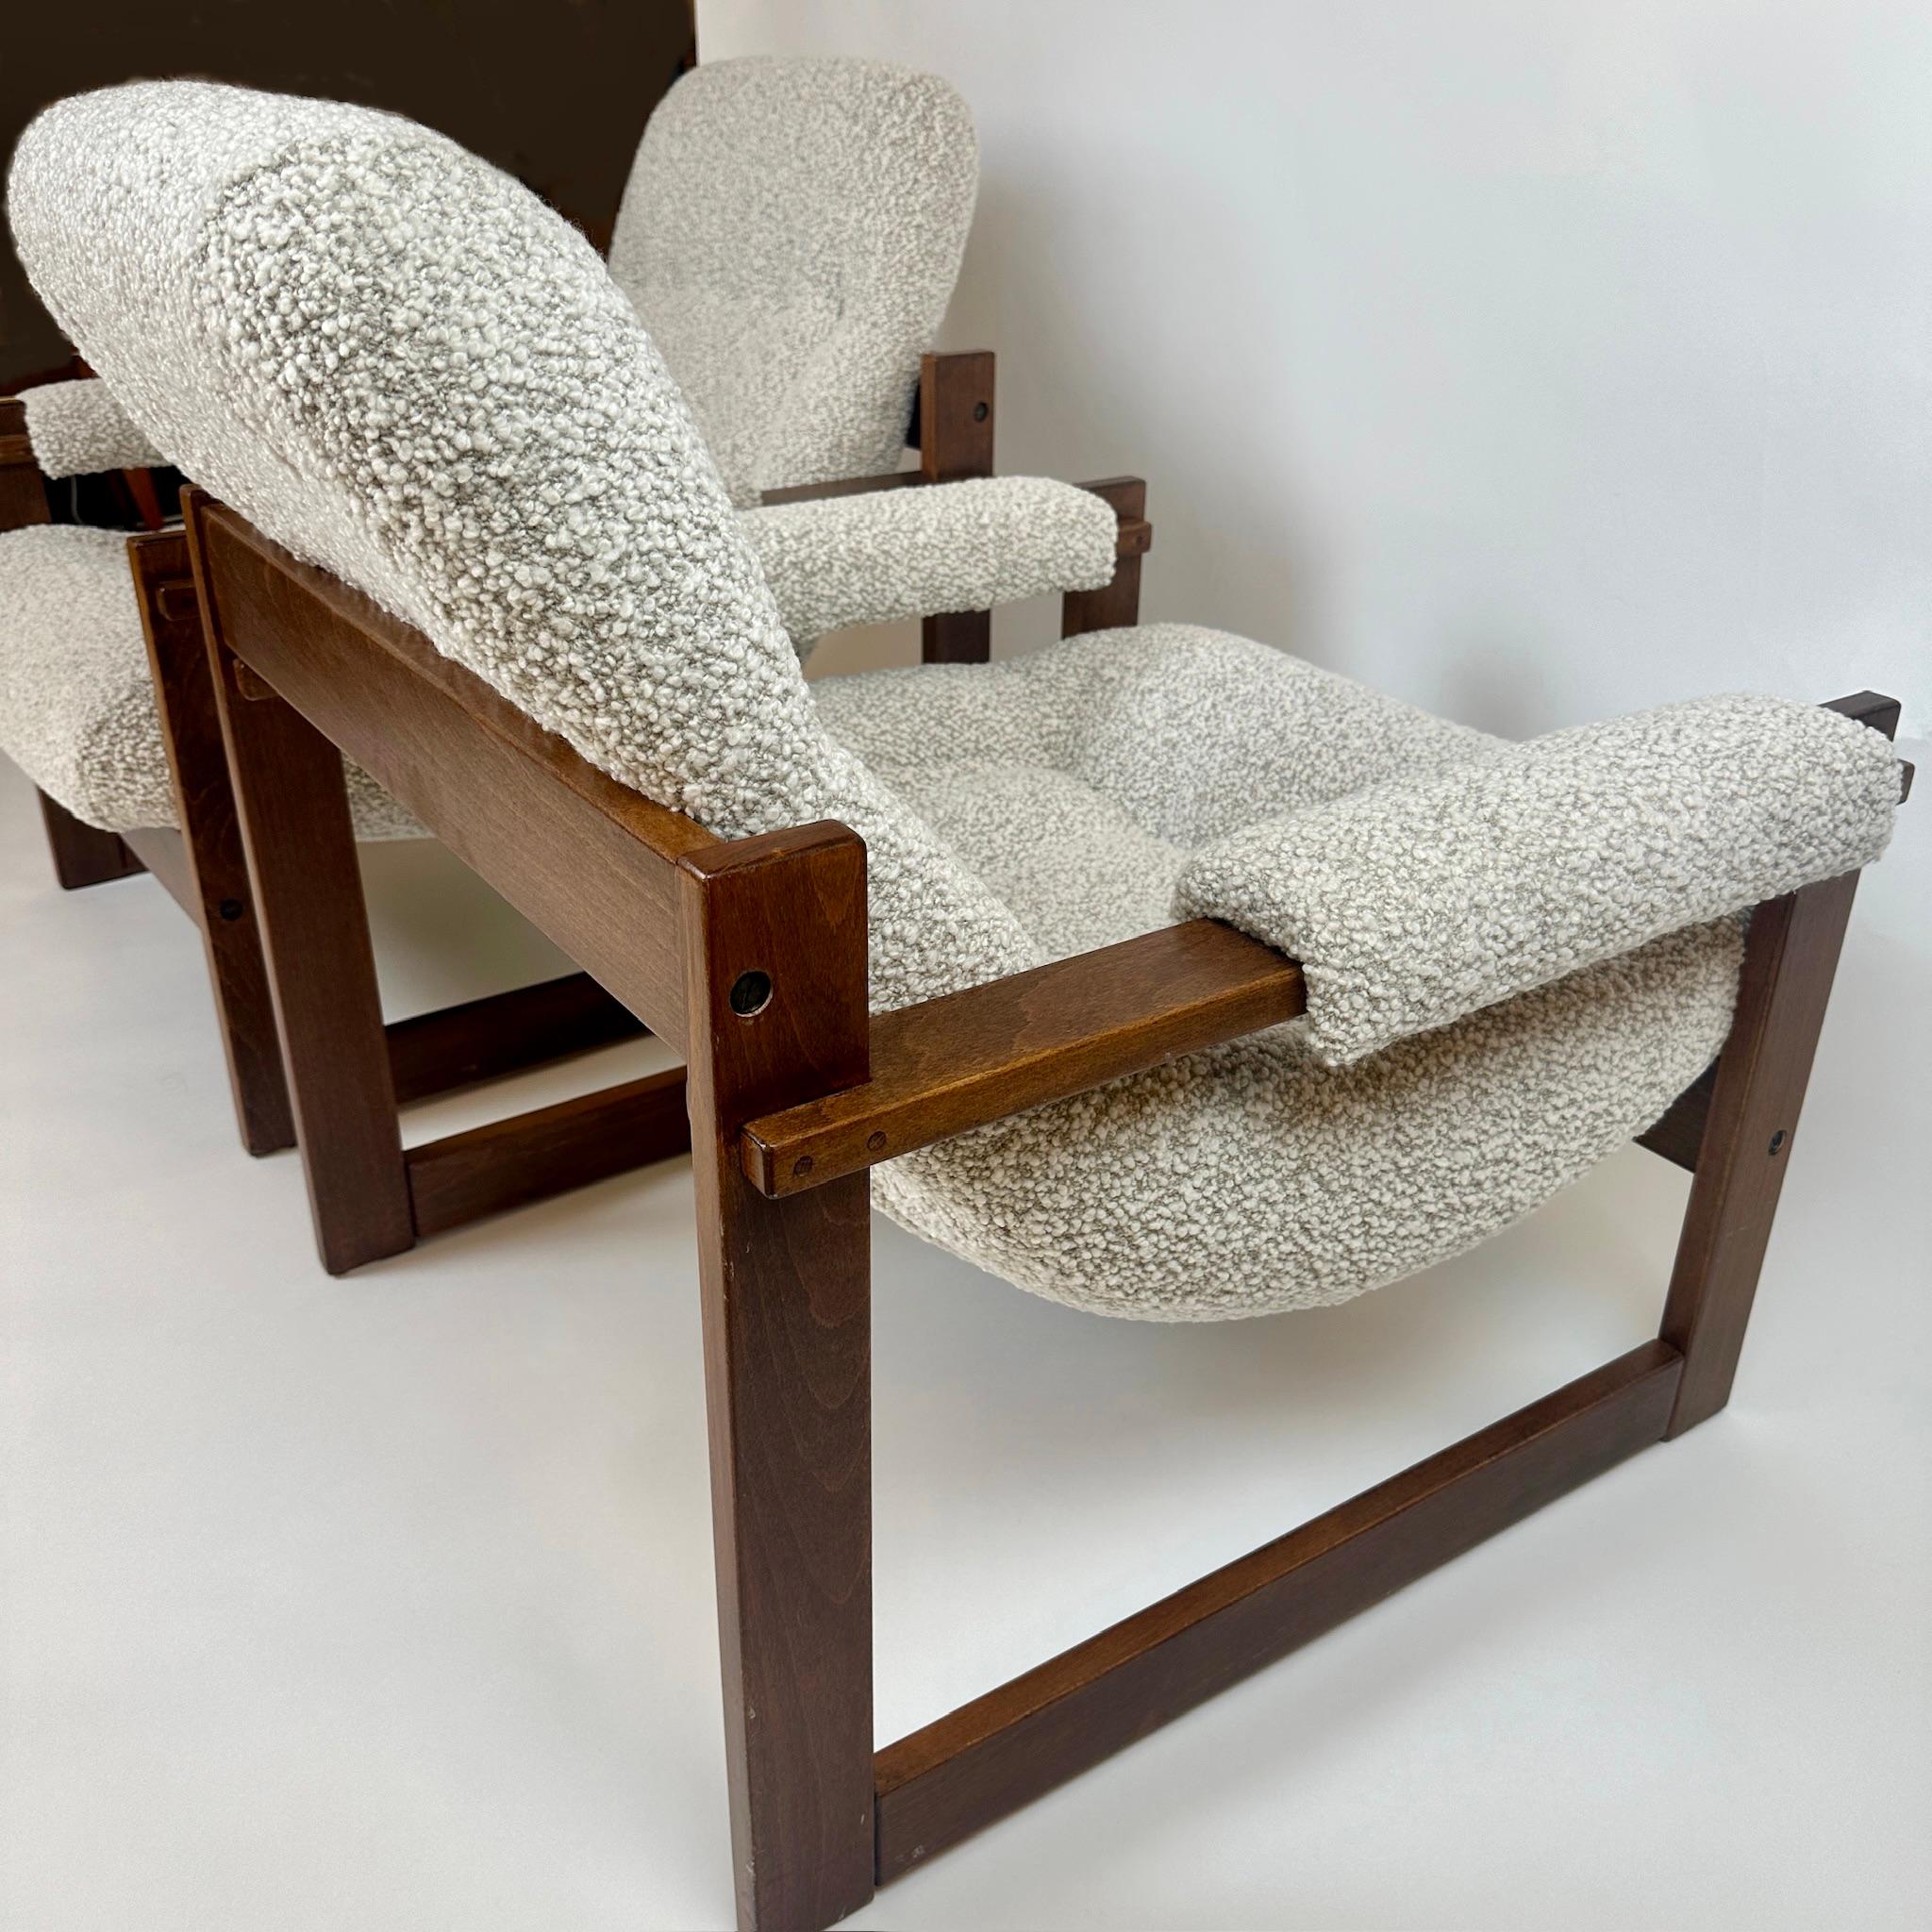 Pair of Brazilian Wood & Beige Wool Bouclè MP-163 Earth Chairs by Percival Lafer For Sale 3